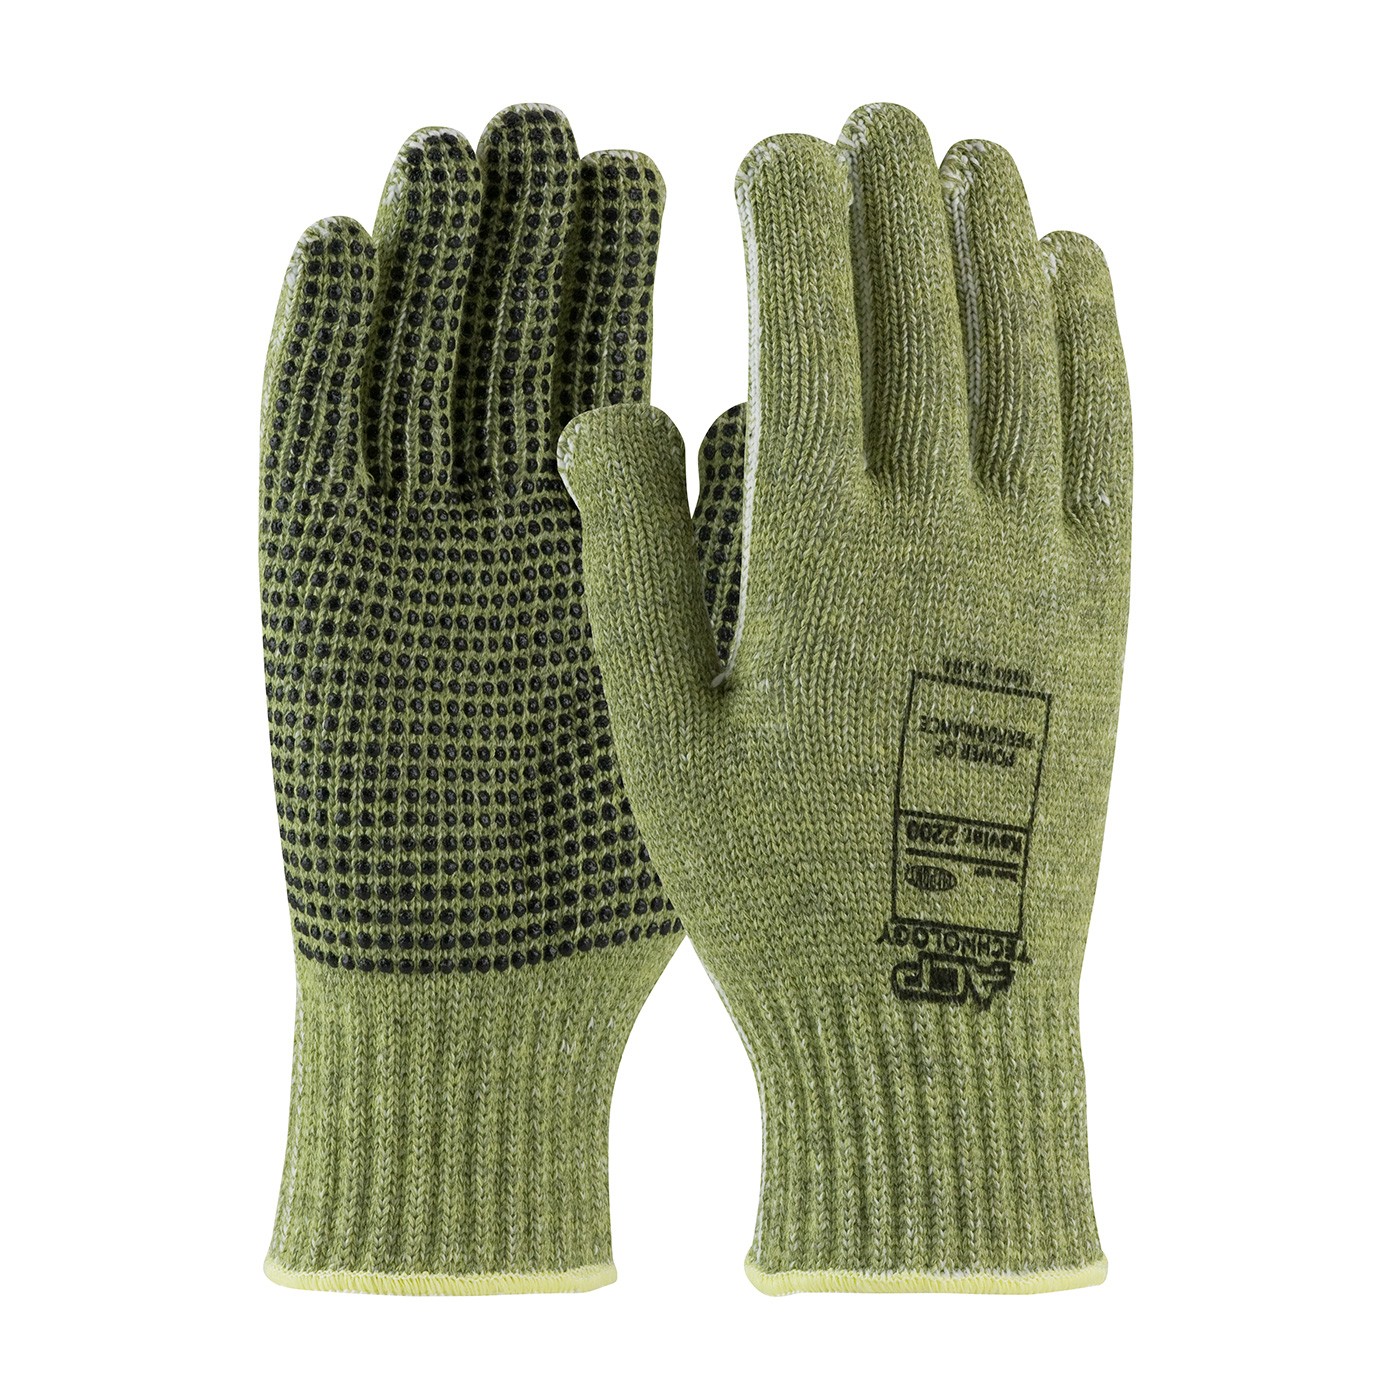 Kut Gard® Seamless Knit ACP / Kevlar® Blended Glove with PVC Dot Grip and Polyester Lining - Economy Weight  (#08-KA740PD)